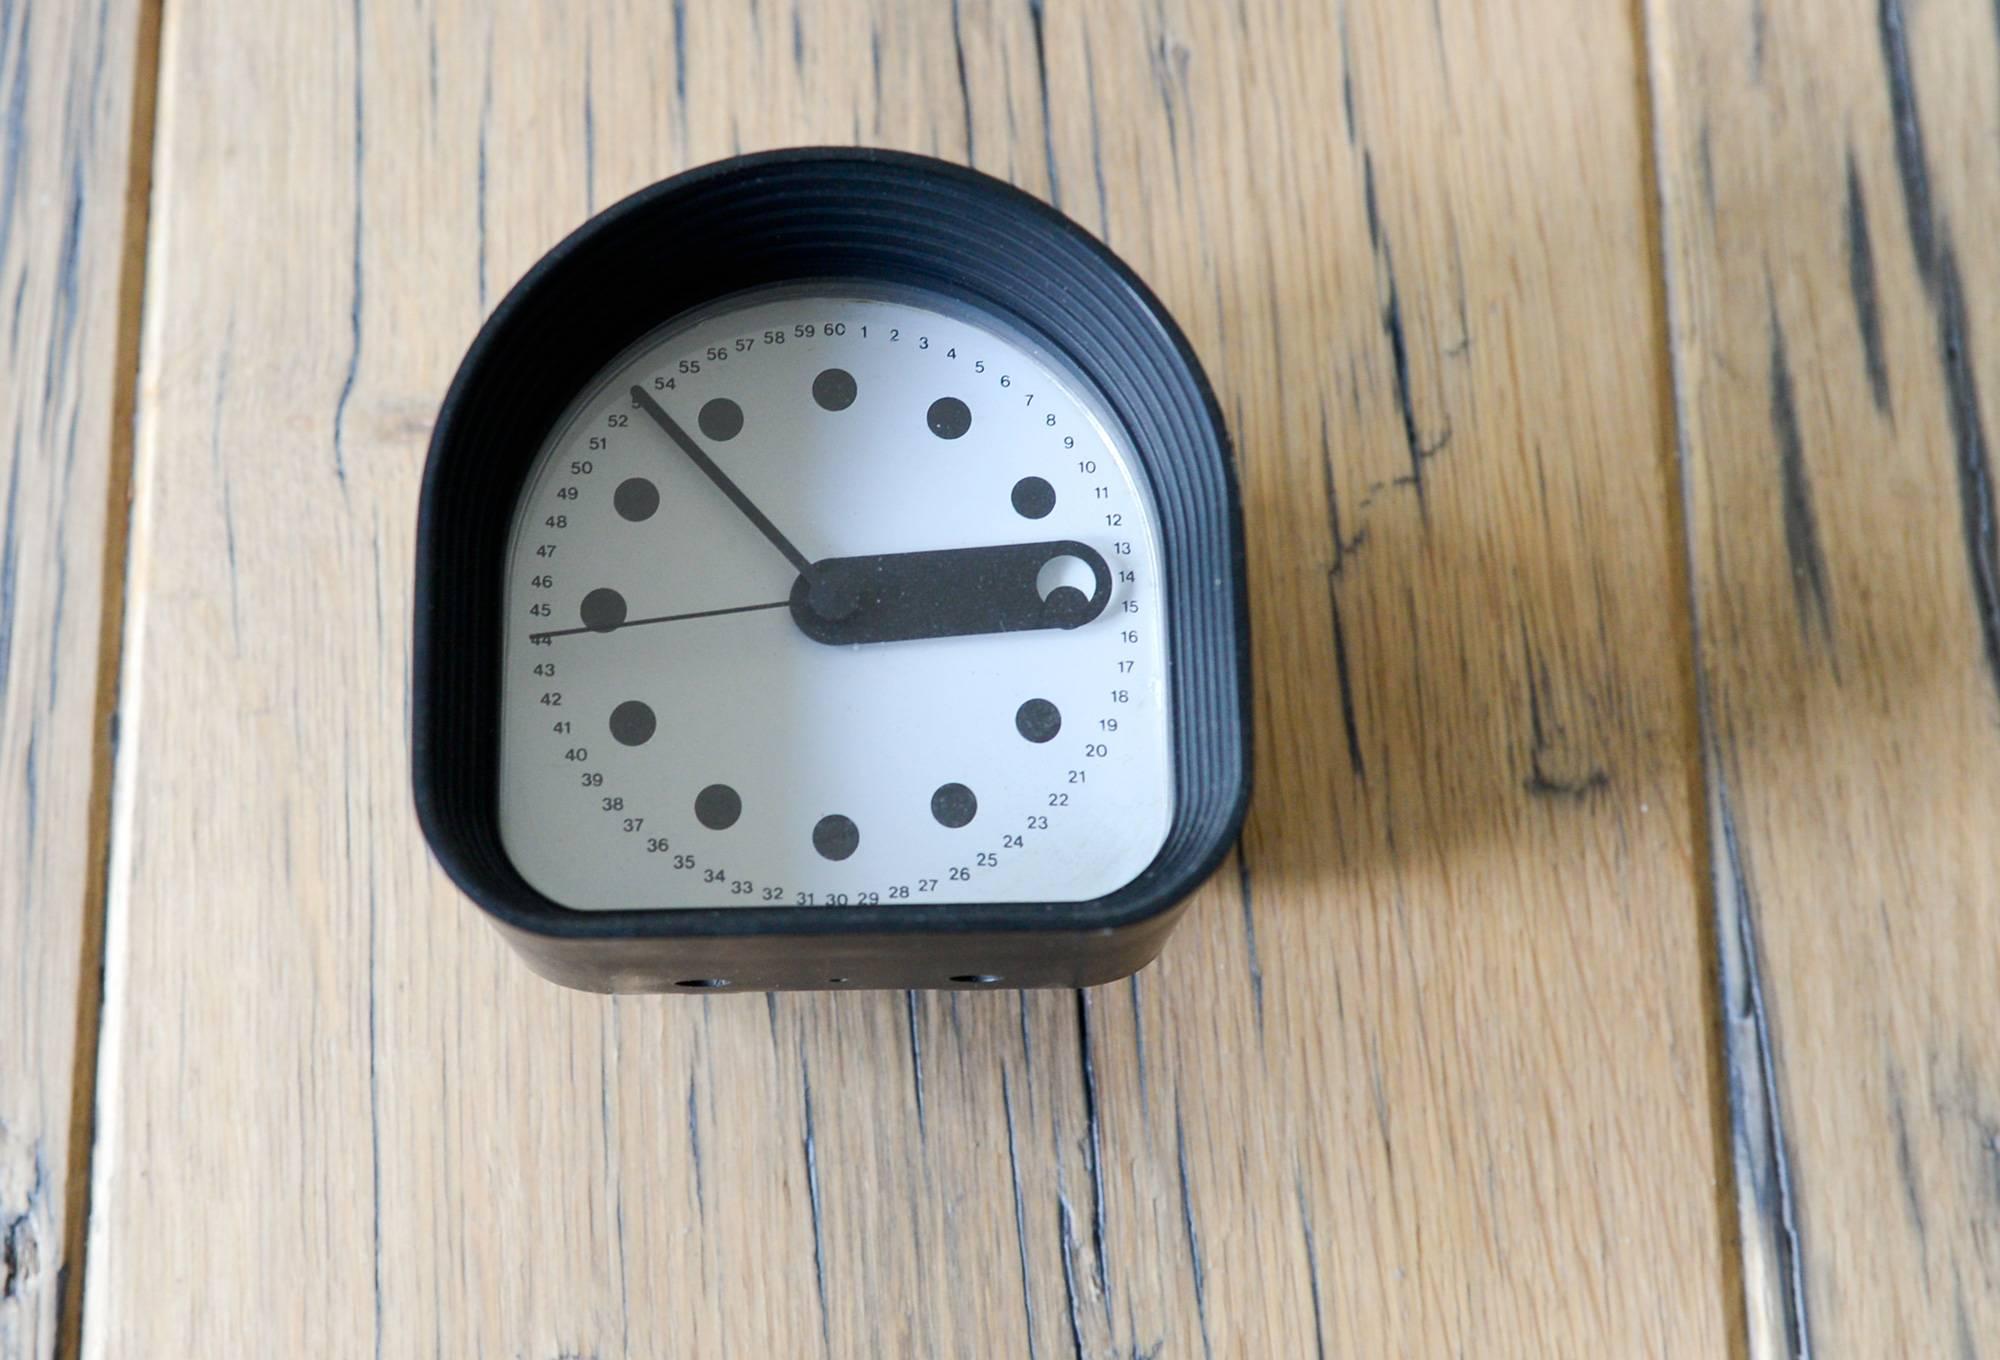 First edition optic clock
by Joe Colombo.
For Ritz Italora, Italy, 1969.
In working very good condition.
Marked: ITALORA, MILANO/ITALY.
About 8 X 8 cm.